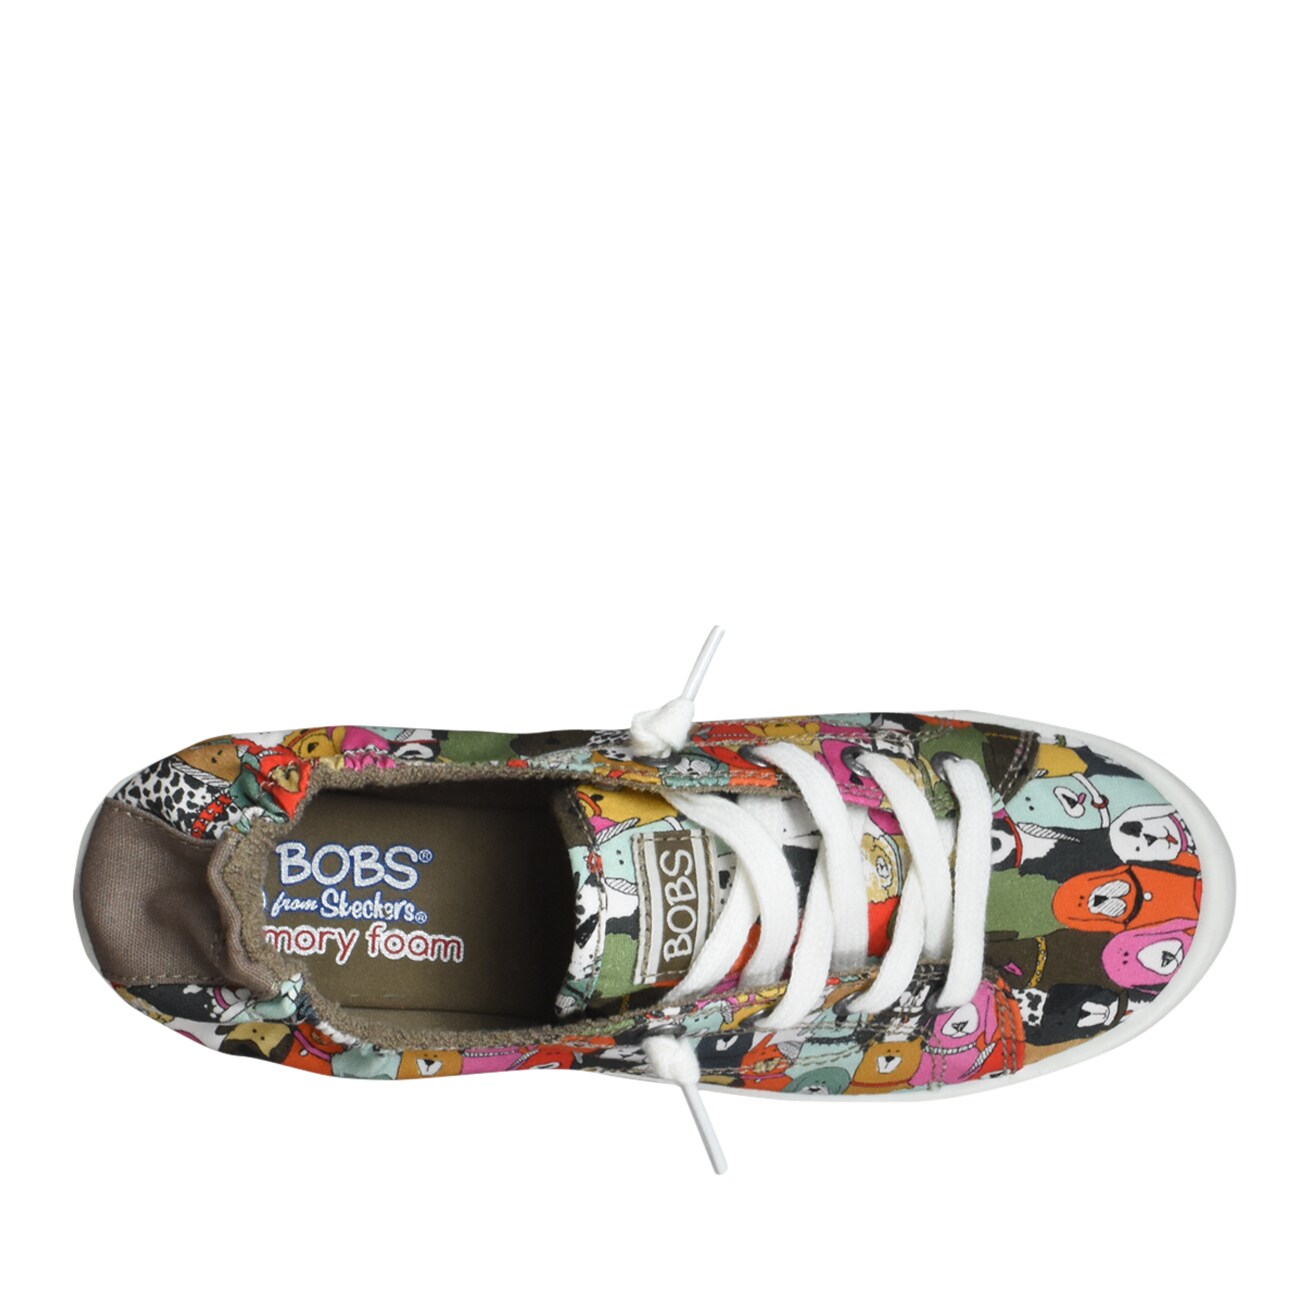 bobs shoes with dogs on them